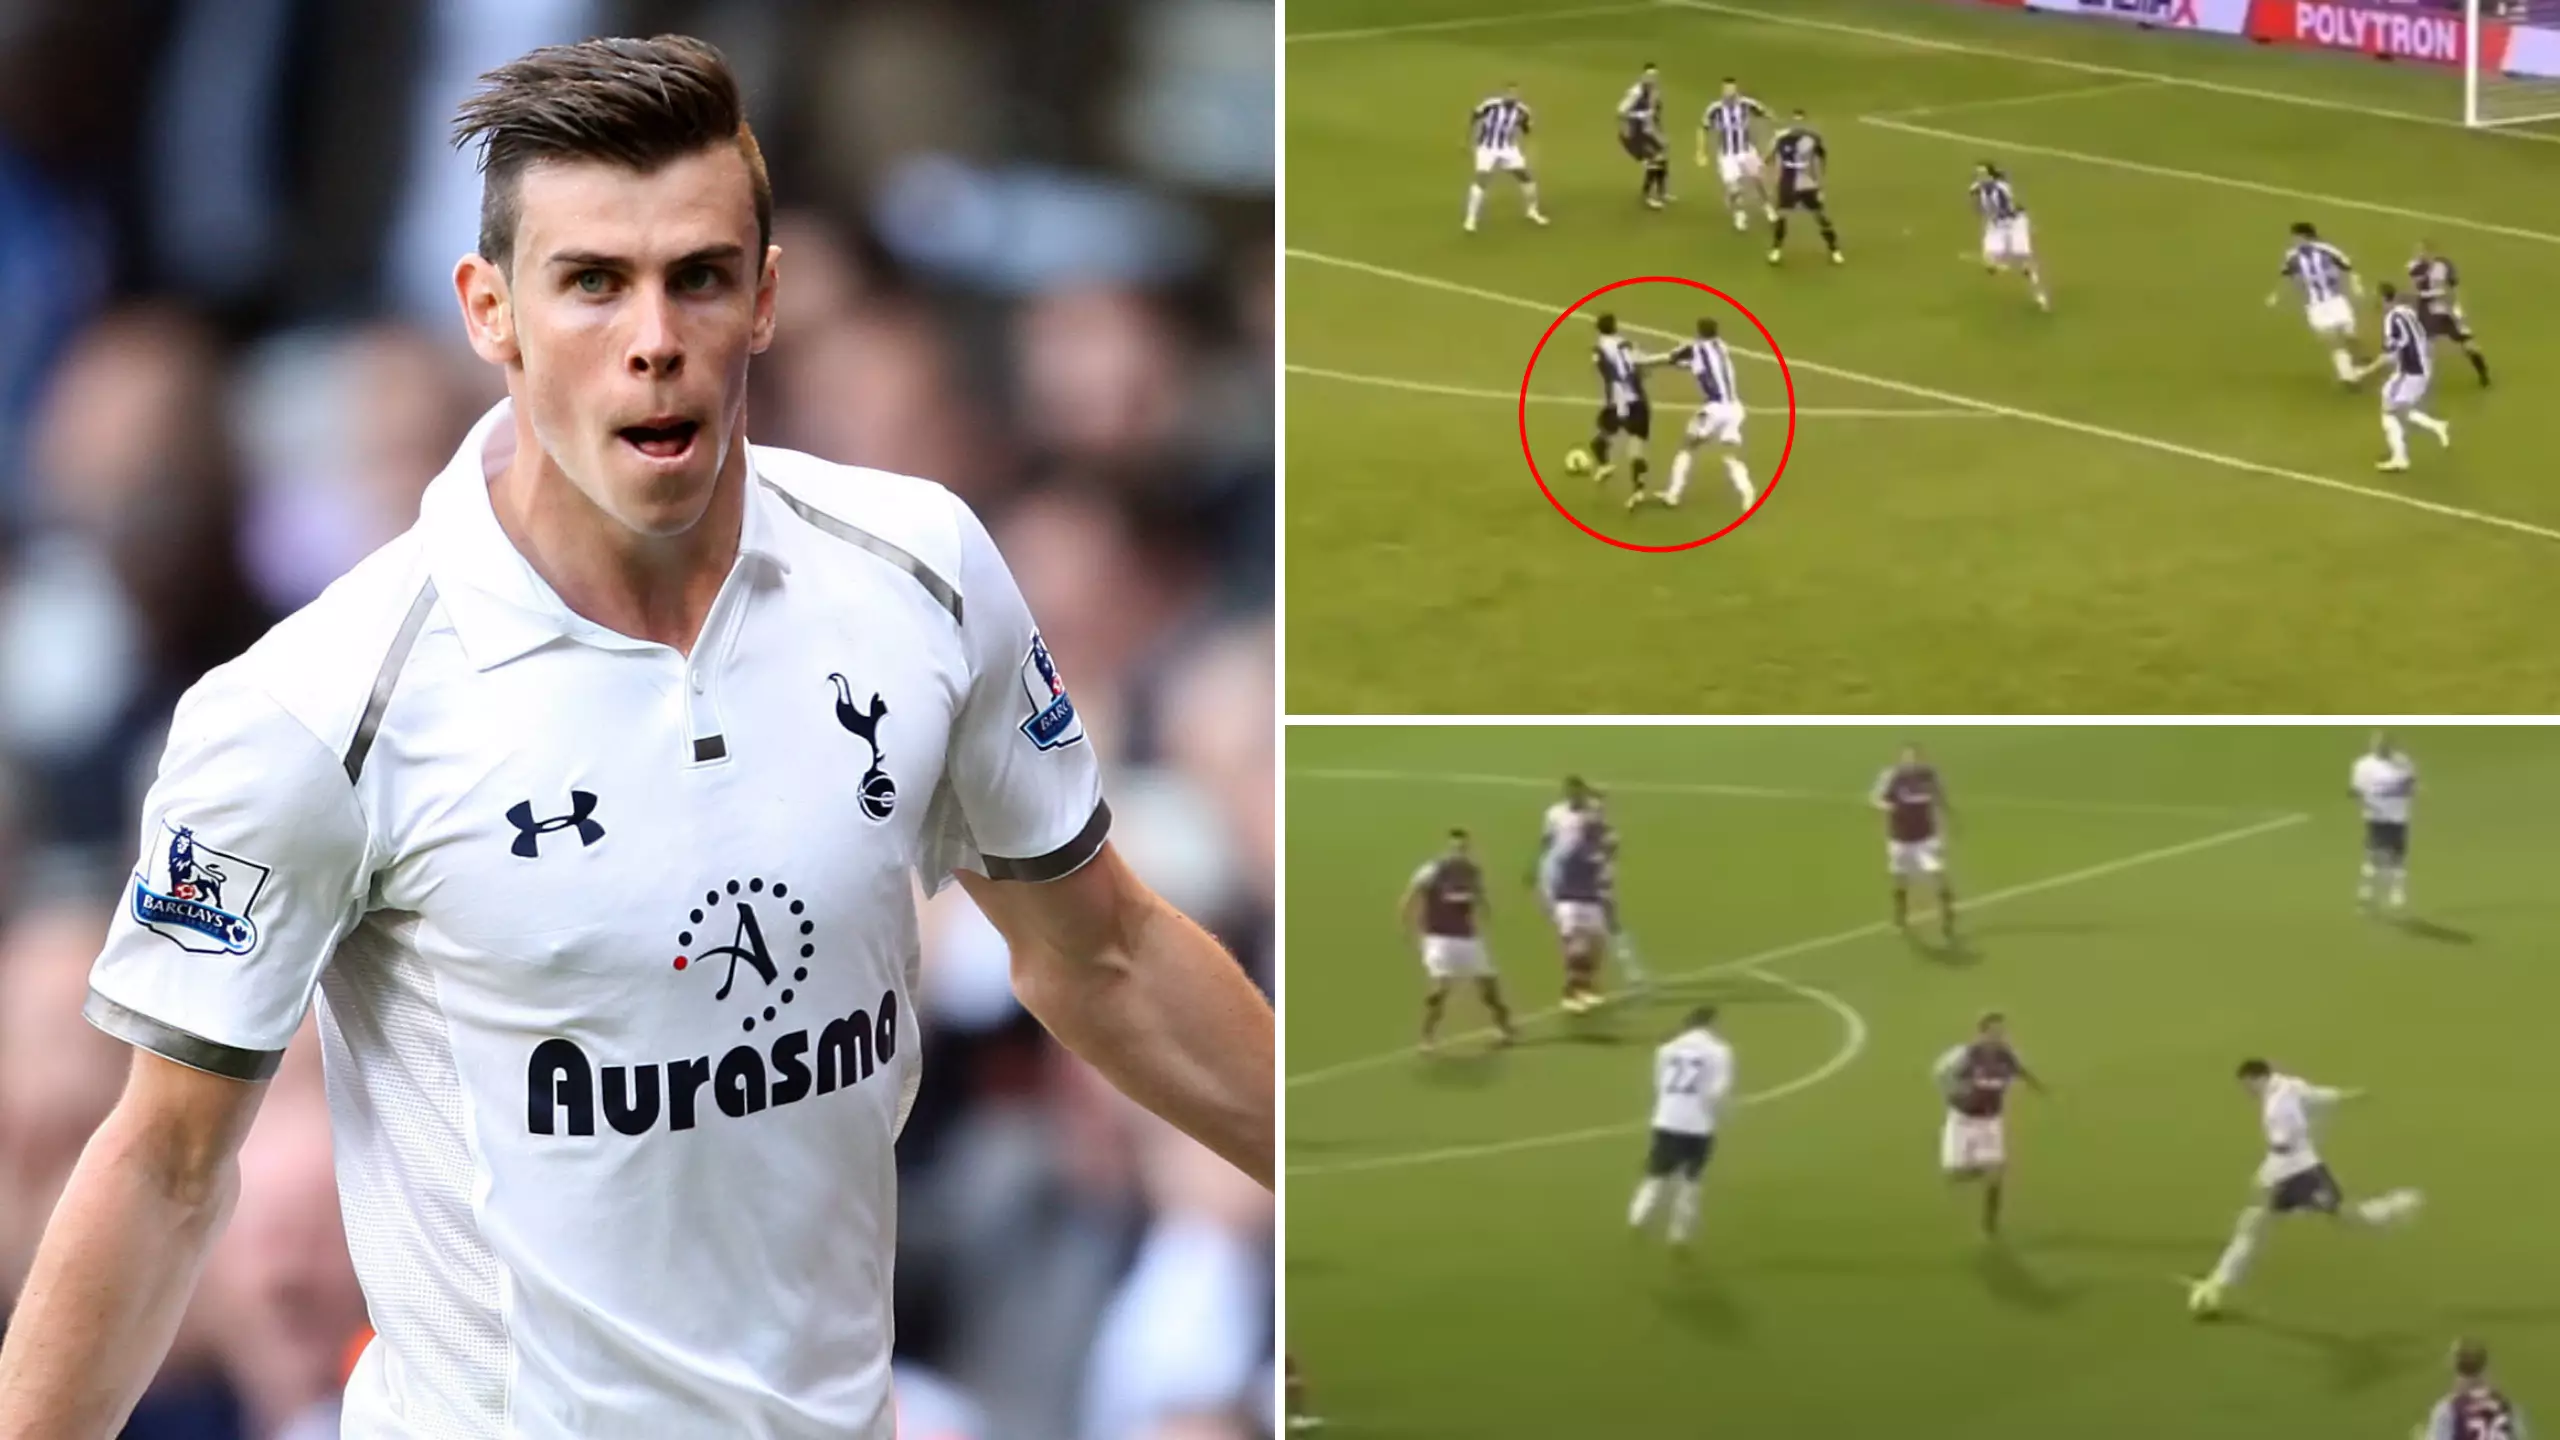 Fascinating Video Of Peak Gareth Bale Proves He Is Unfairly Treated At Real Madrid